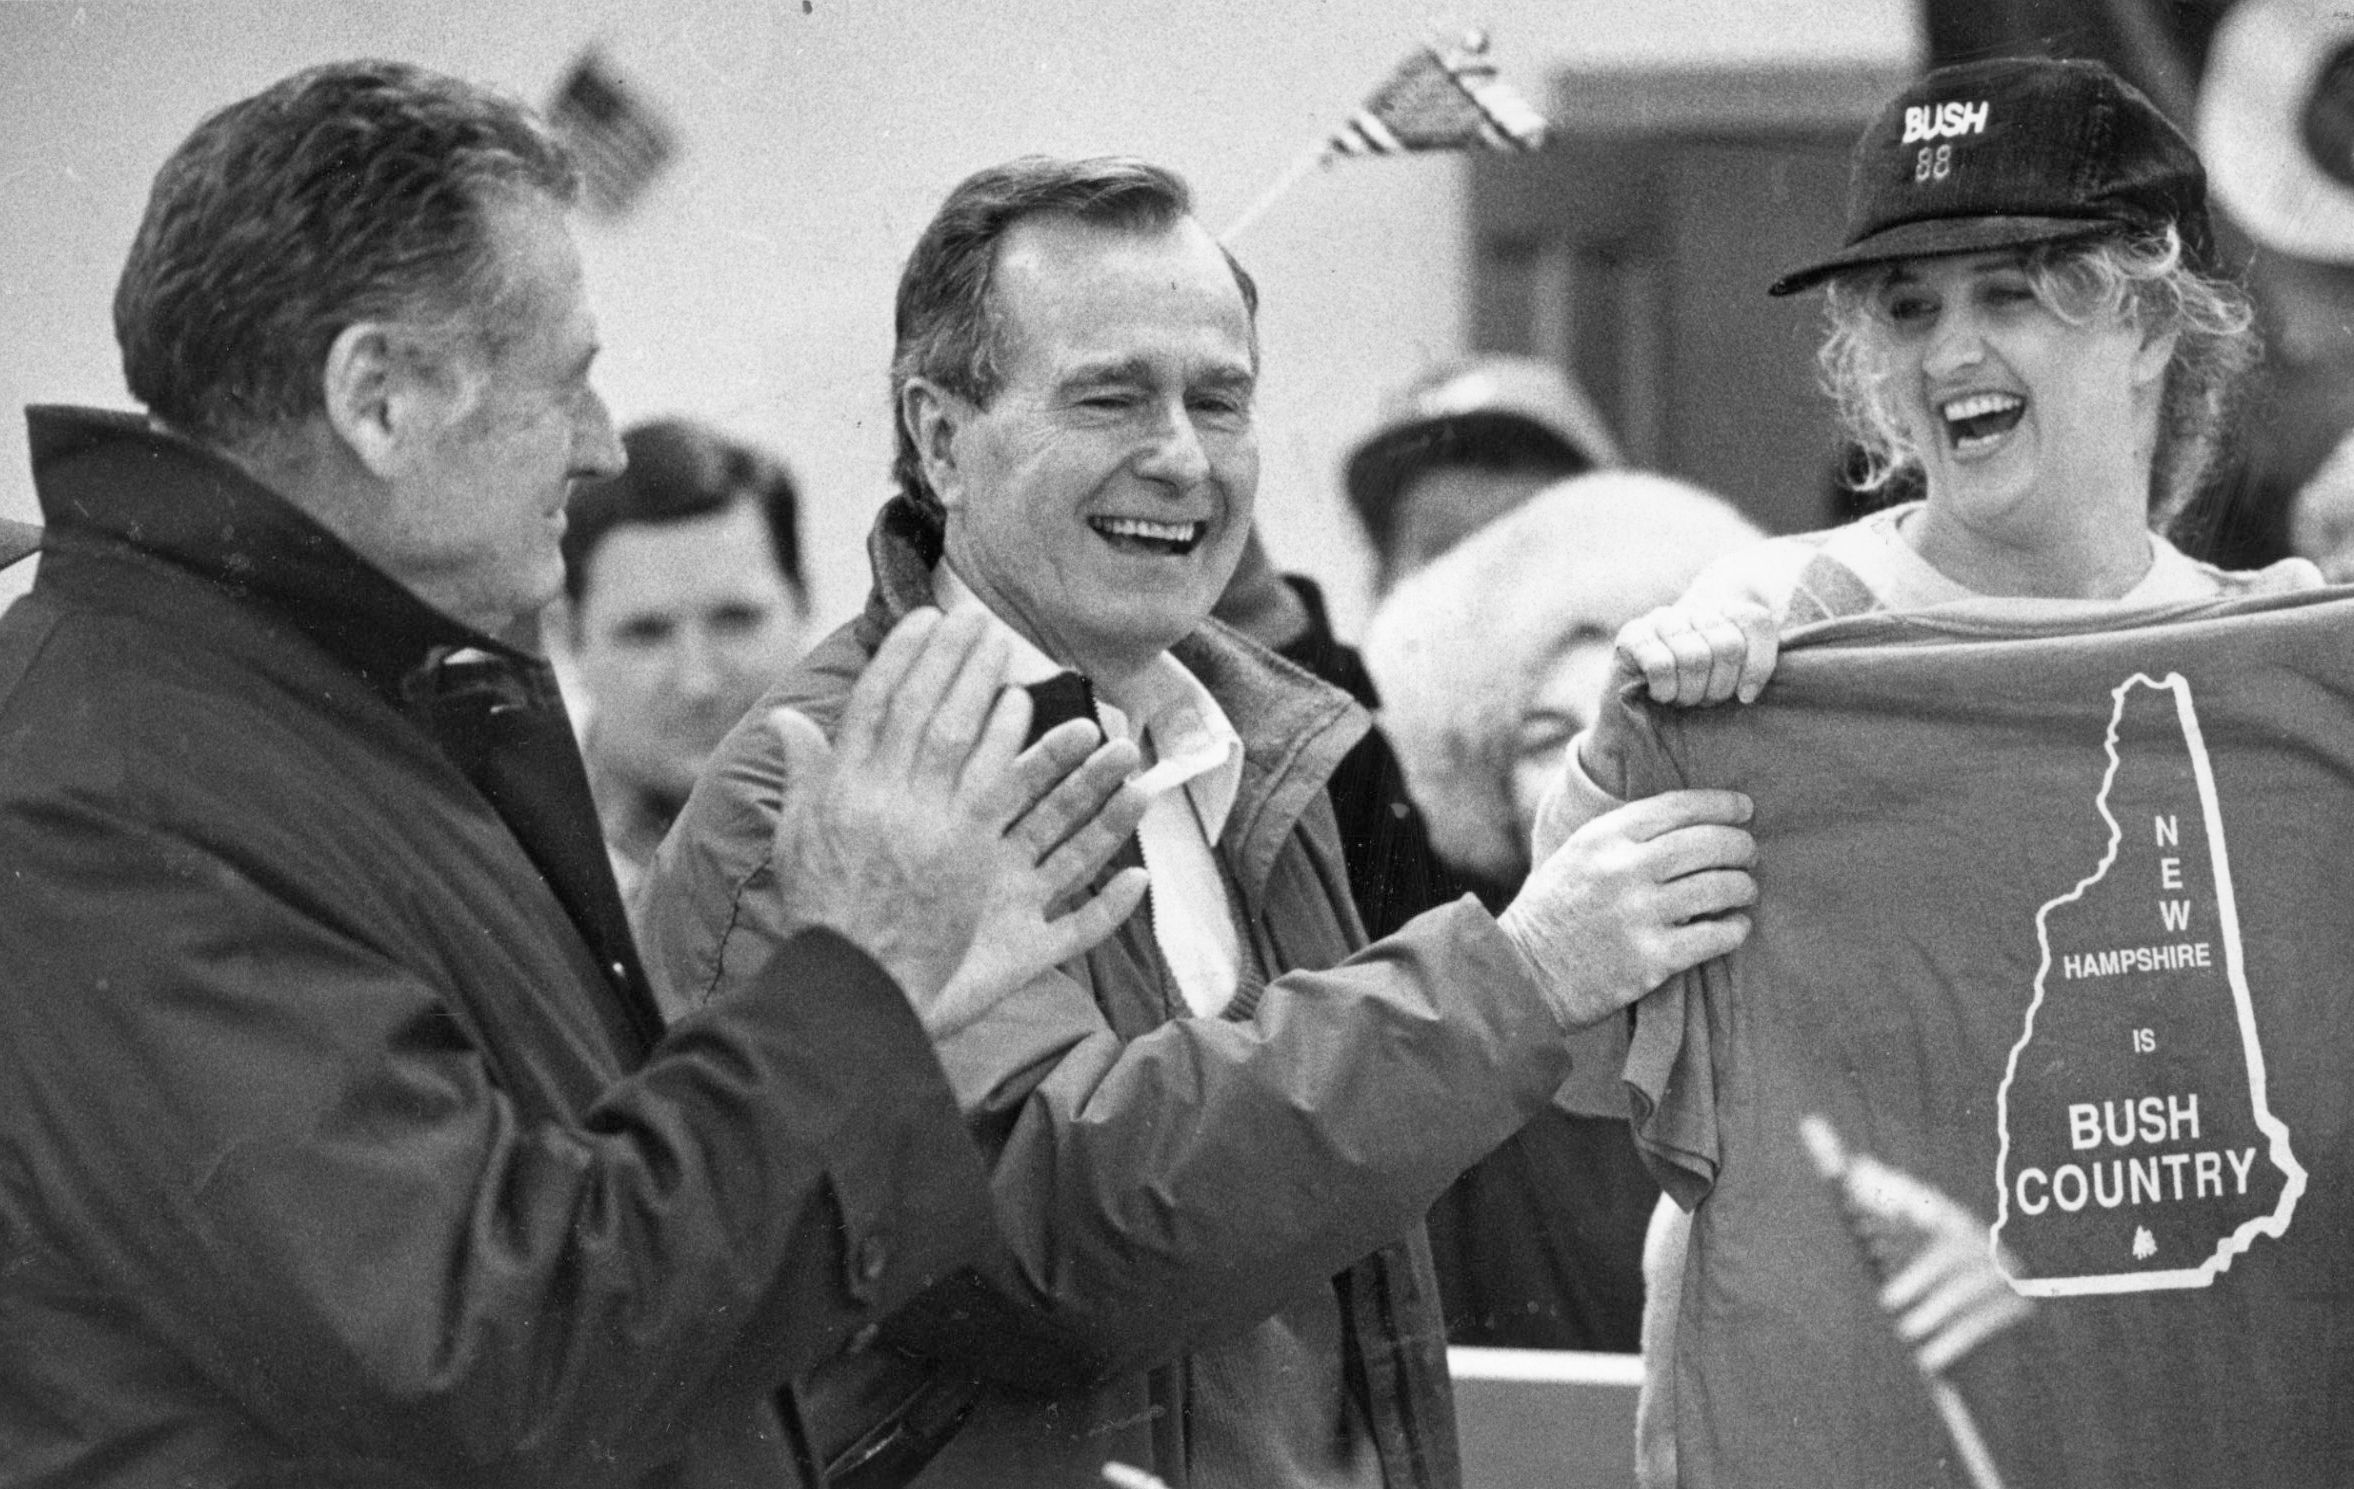 A black and white image of Bush campaigning 